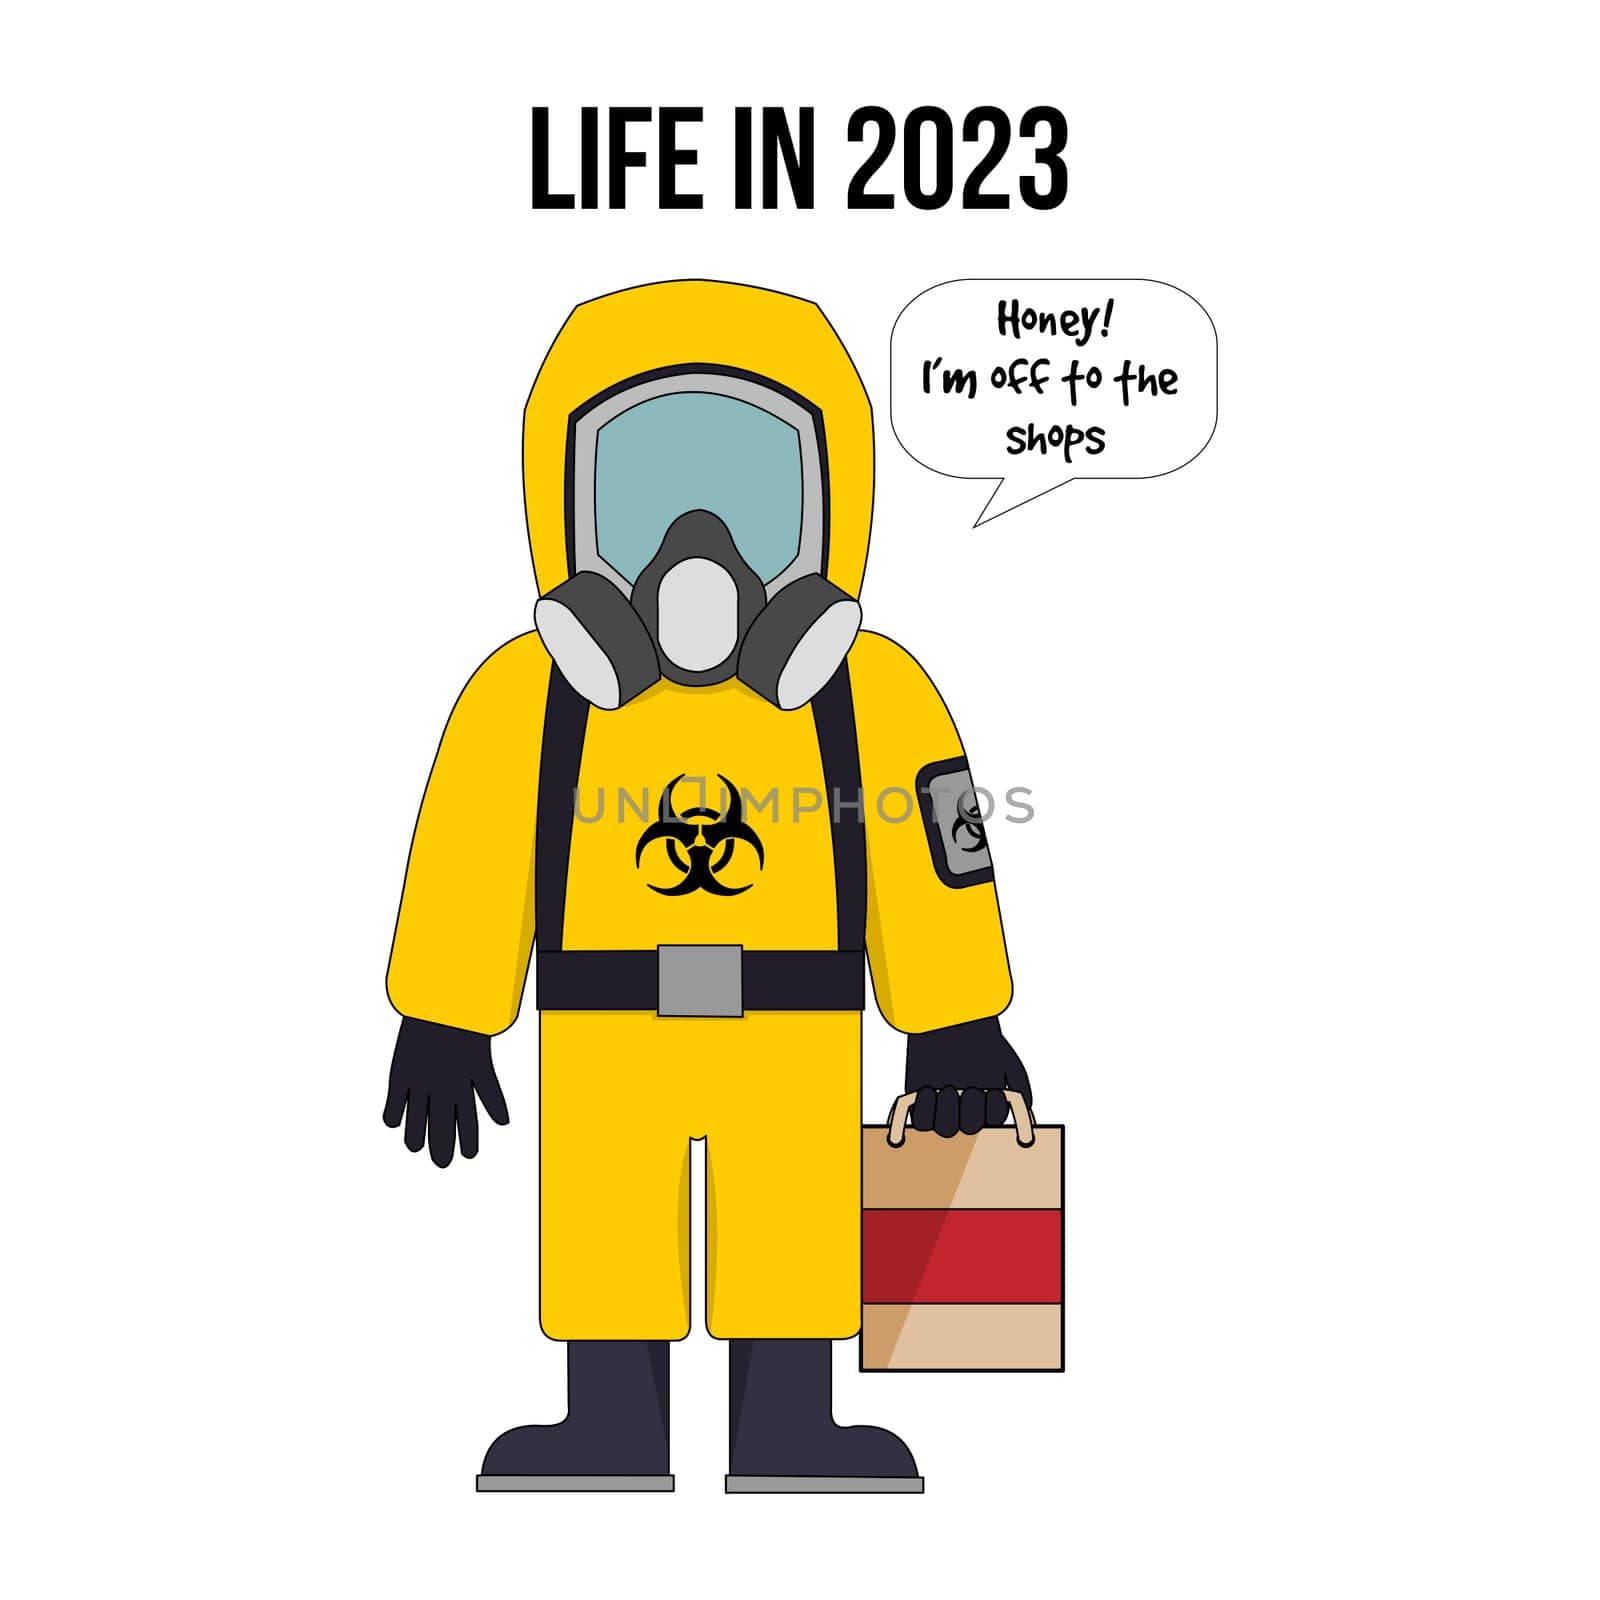 A person holding a carrier bag going to the shops wearing a hazard suit with the text "life in 2023".